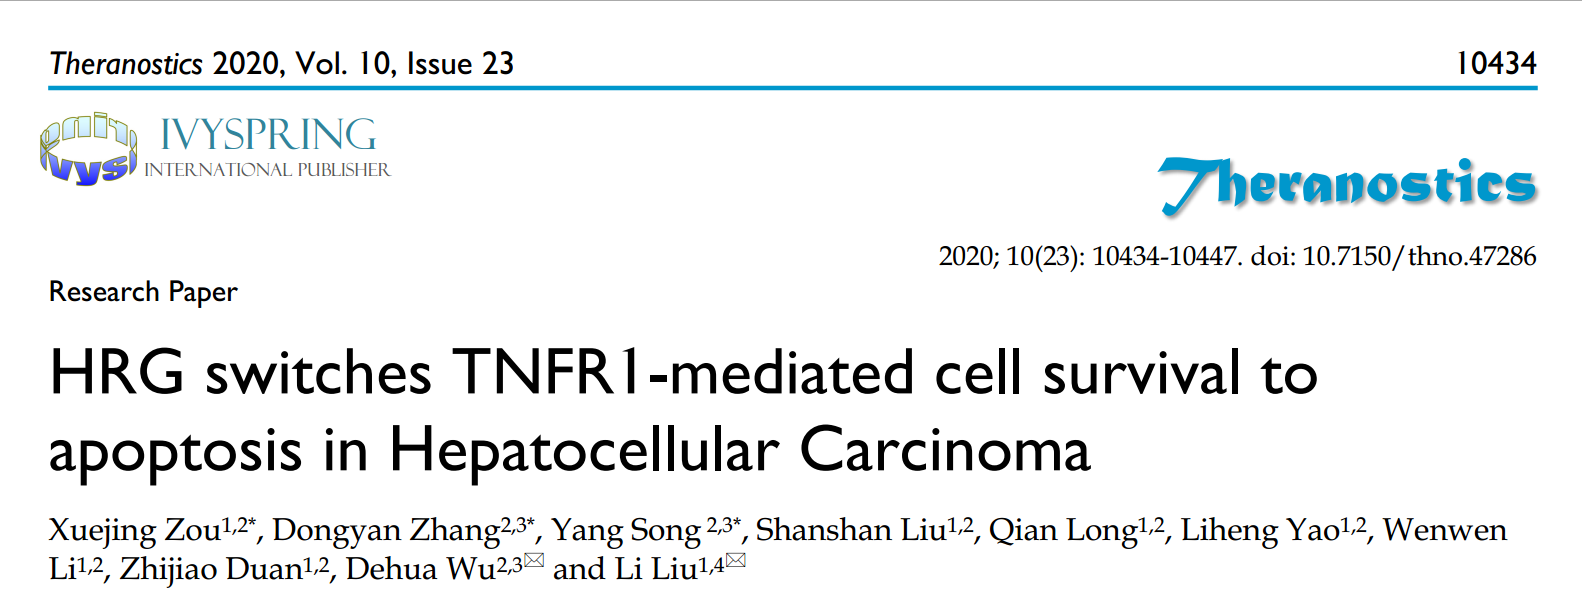 HRG switches TNFR1-mediated cell survival to apoptosis in Hepatocellular Carcinoma